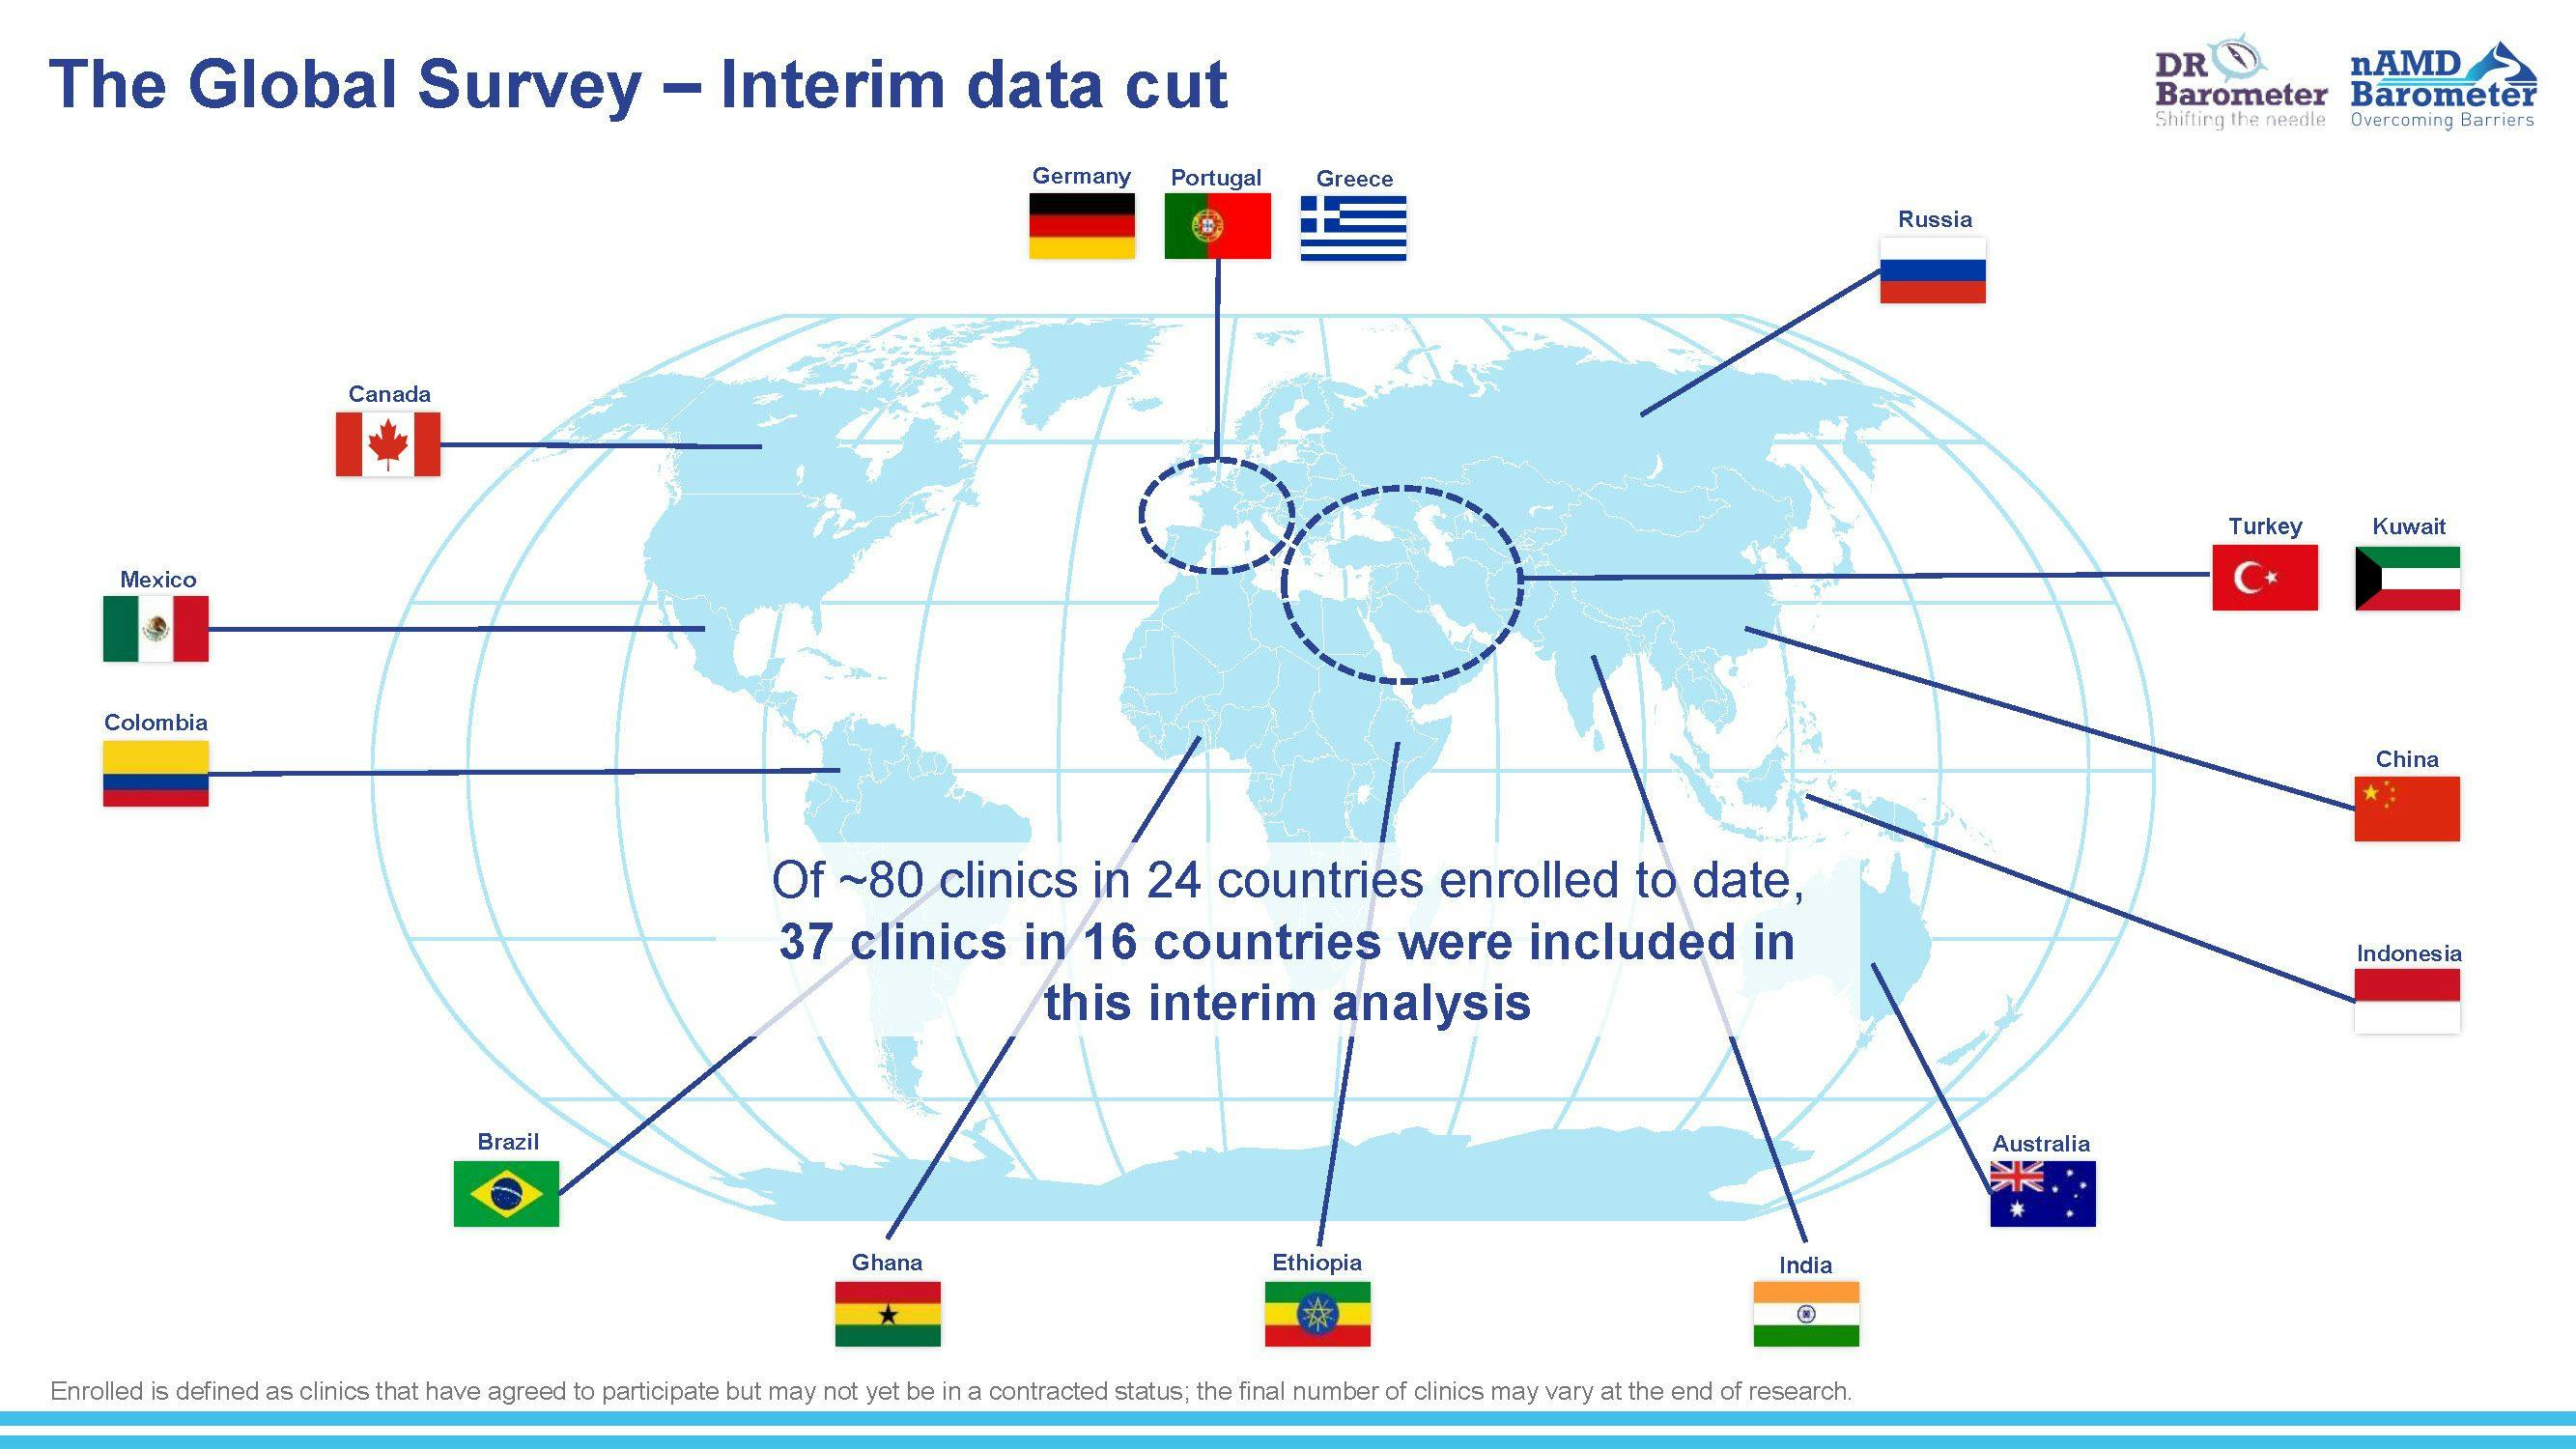 Countries included in the interim analysis of the survey. (Image courtesy of The Barometer Programme, which is sponsored by Bayer.)